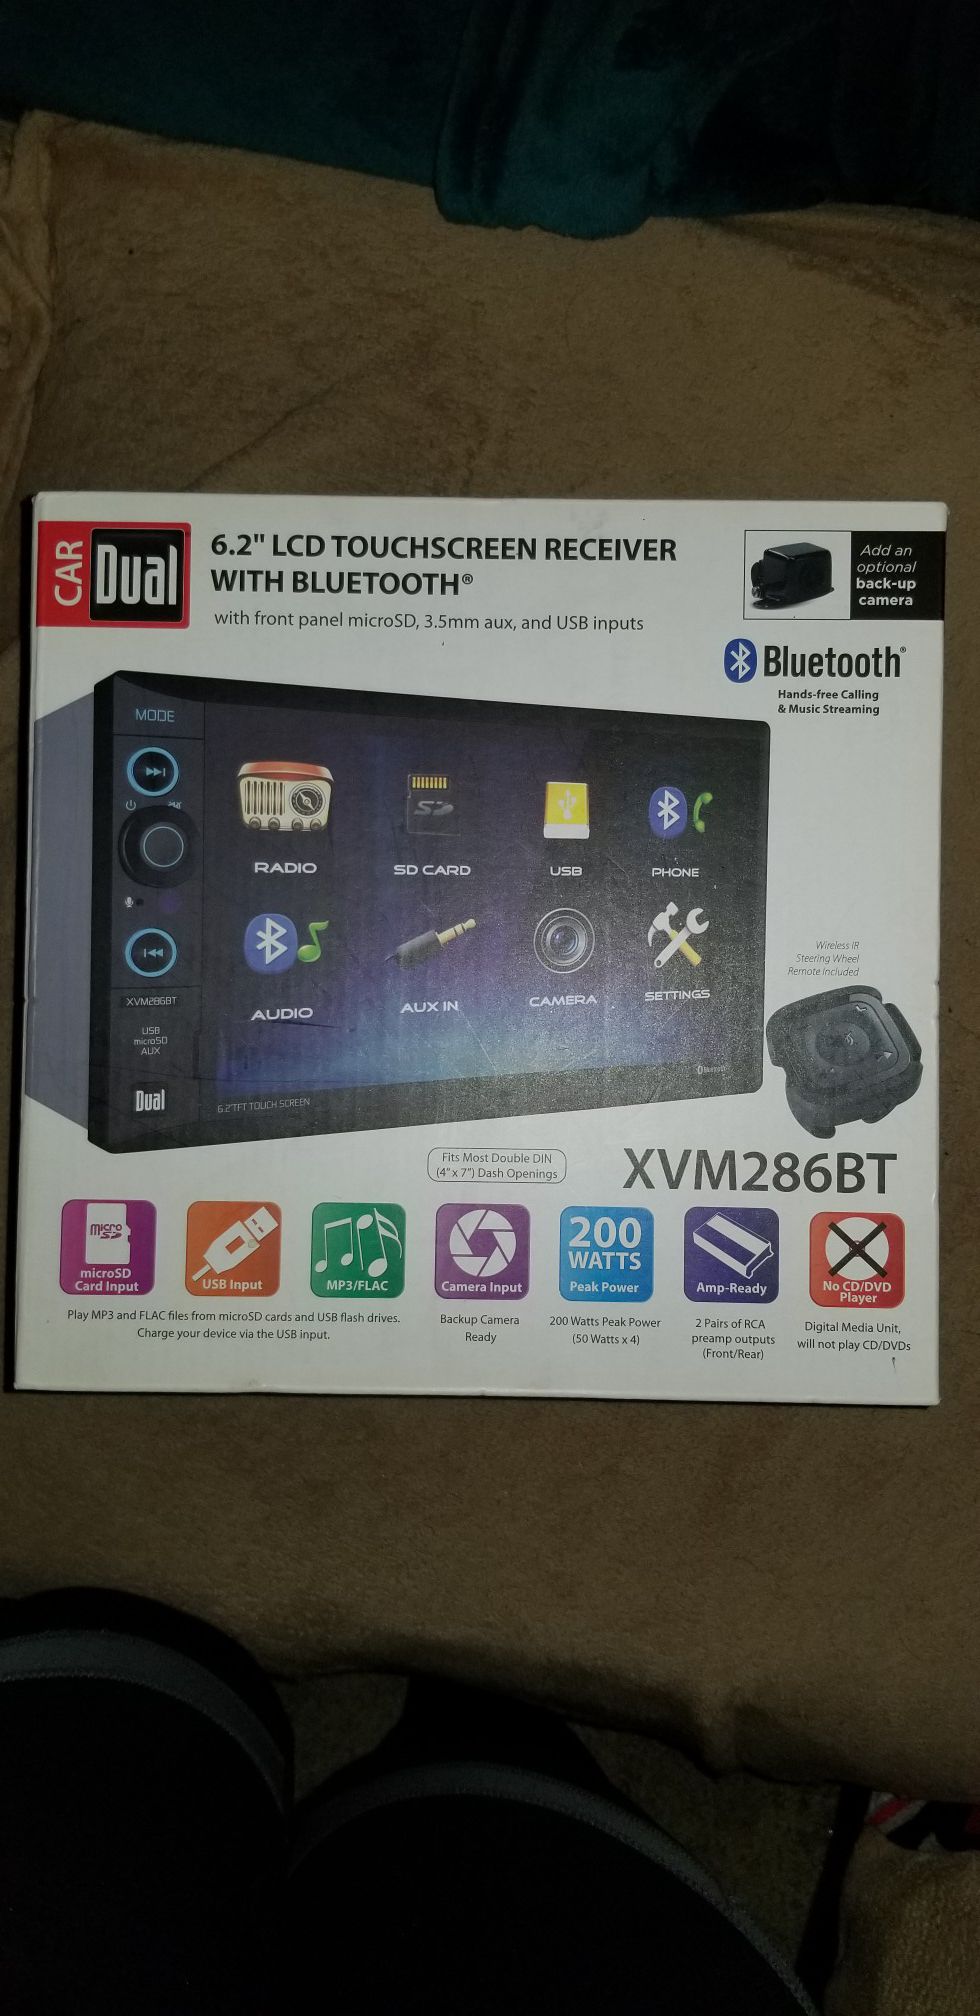 Dual 6.2 touchscreen receiver with Bluetooth